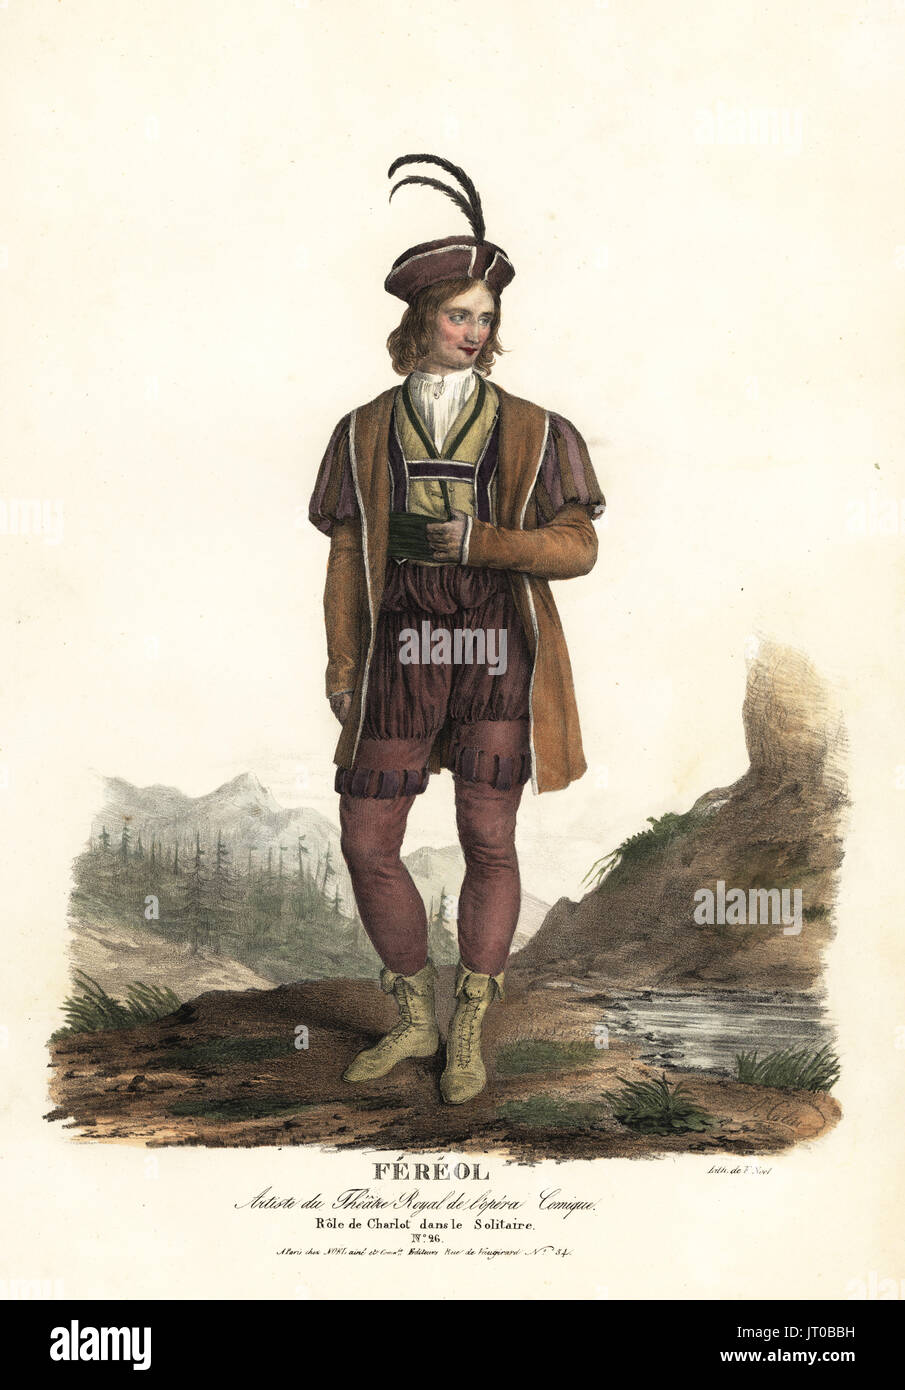 Tenor opera singer Louis Fereol as Charlot in Le Solitaire by Michele Carafa, Theatre Royal de l'Opera Comique, 1822. Handcoloured lithograph by F. Noel after an illustration by Alexandre-Marie Colin from Portraits d'Acteurs et d'Actrices dans different roles, F. Noel, Paris, 1825. Stock Photo